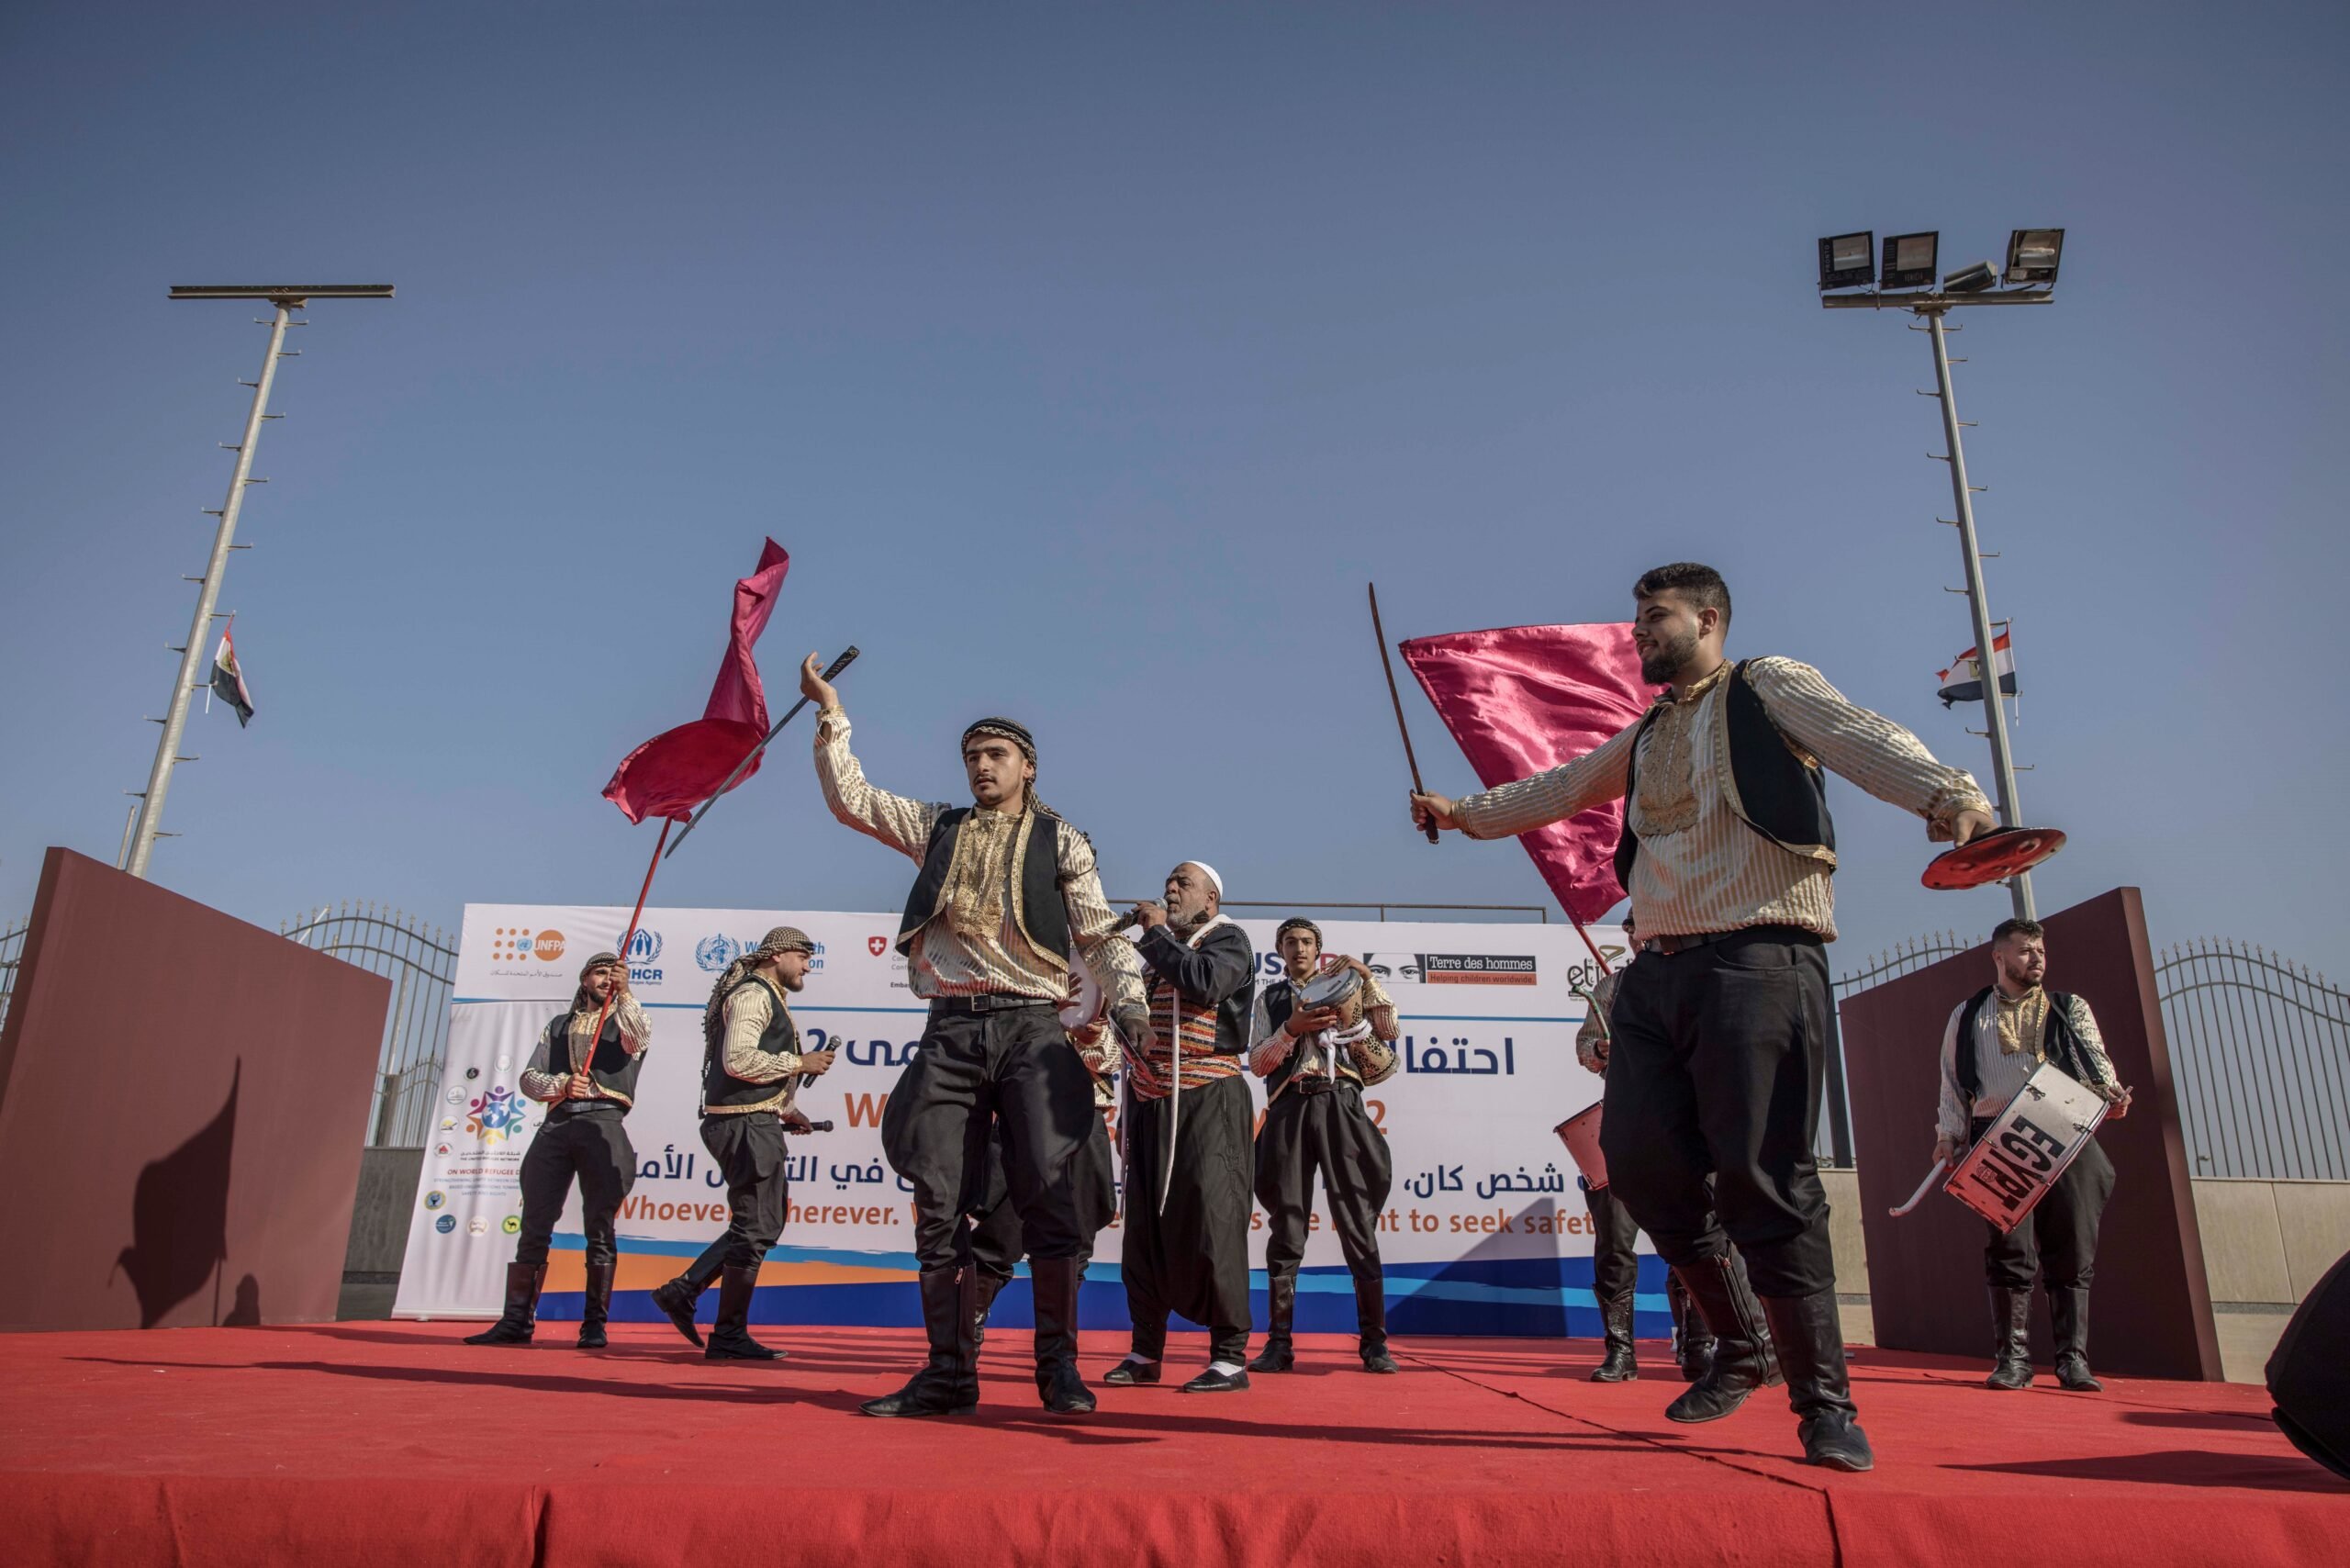 Refugees and asylum-seekers perform a traditional dance during the community event. UNHCR/Pedro Costa Gomes.